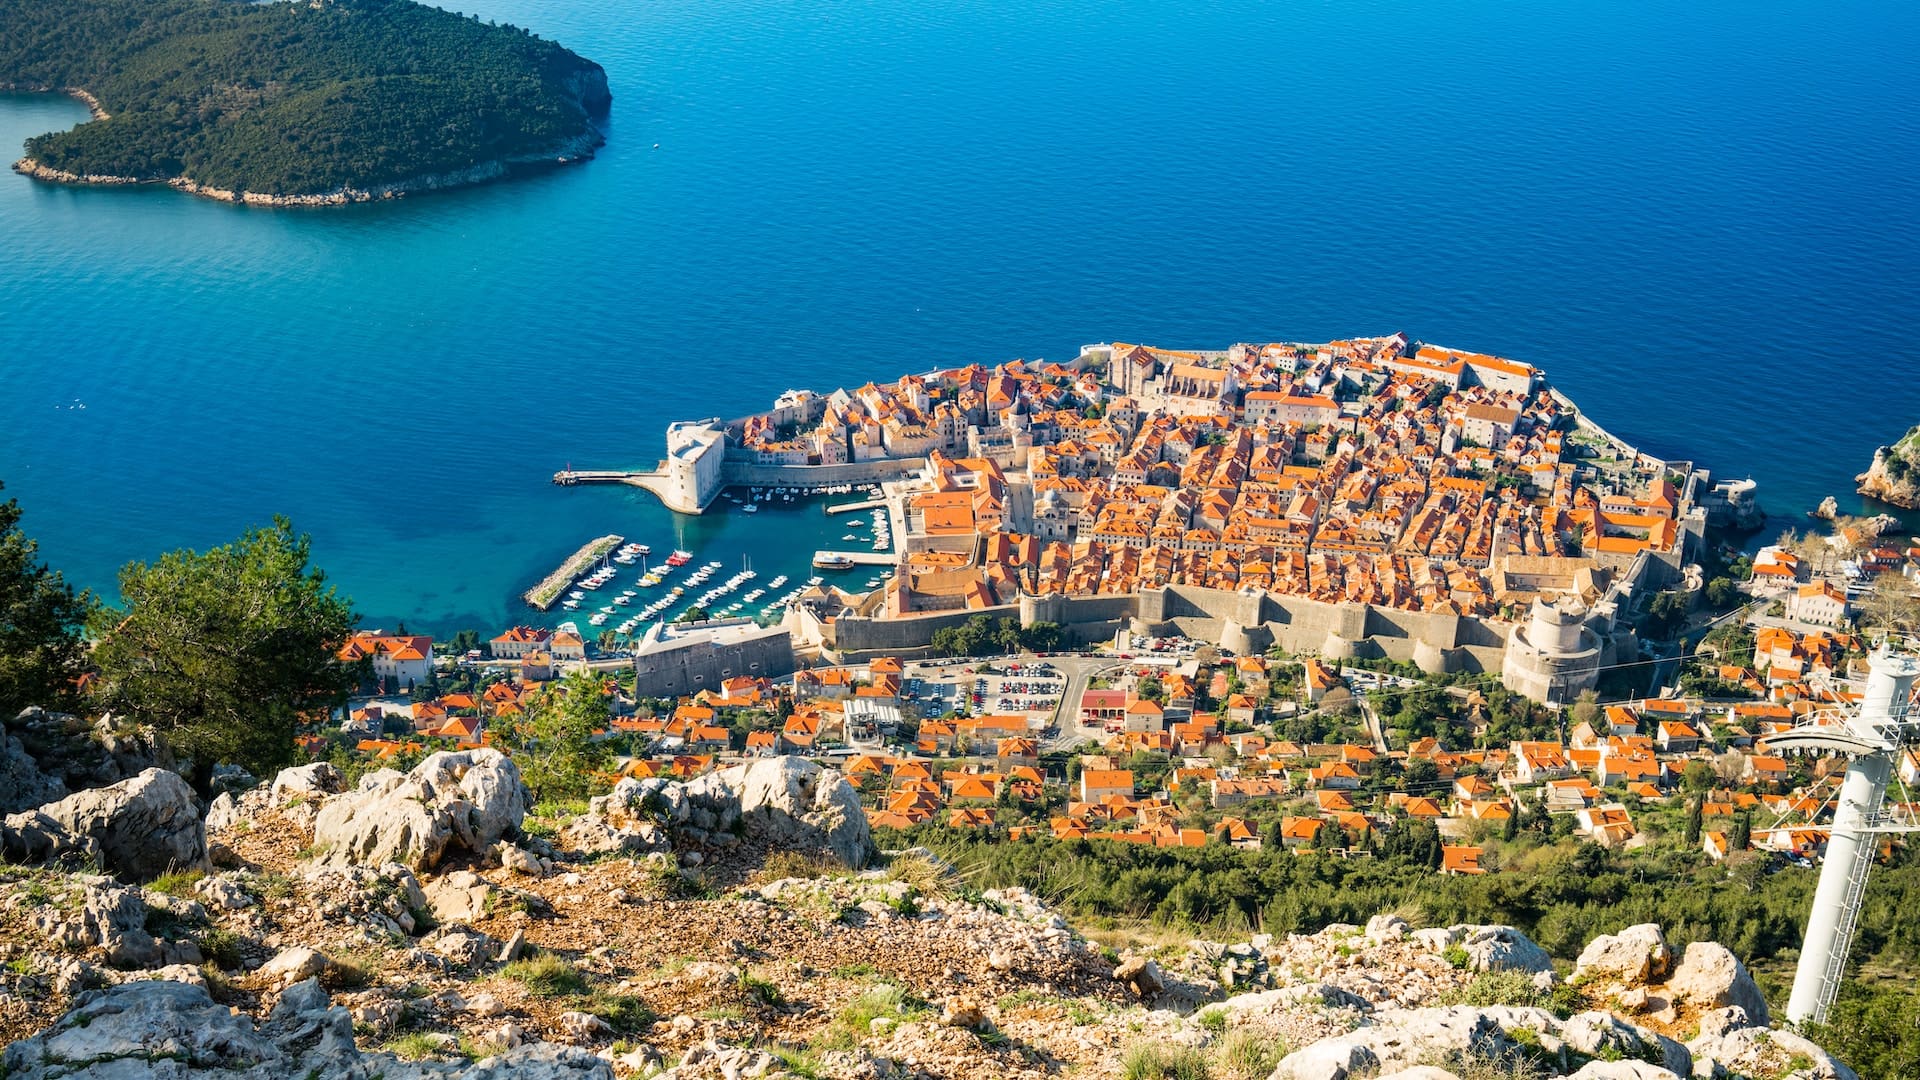 Dubrovnik is one of the most picturesque travel destinations in Croatia (photo: Stuart Claggett)